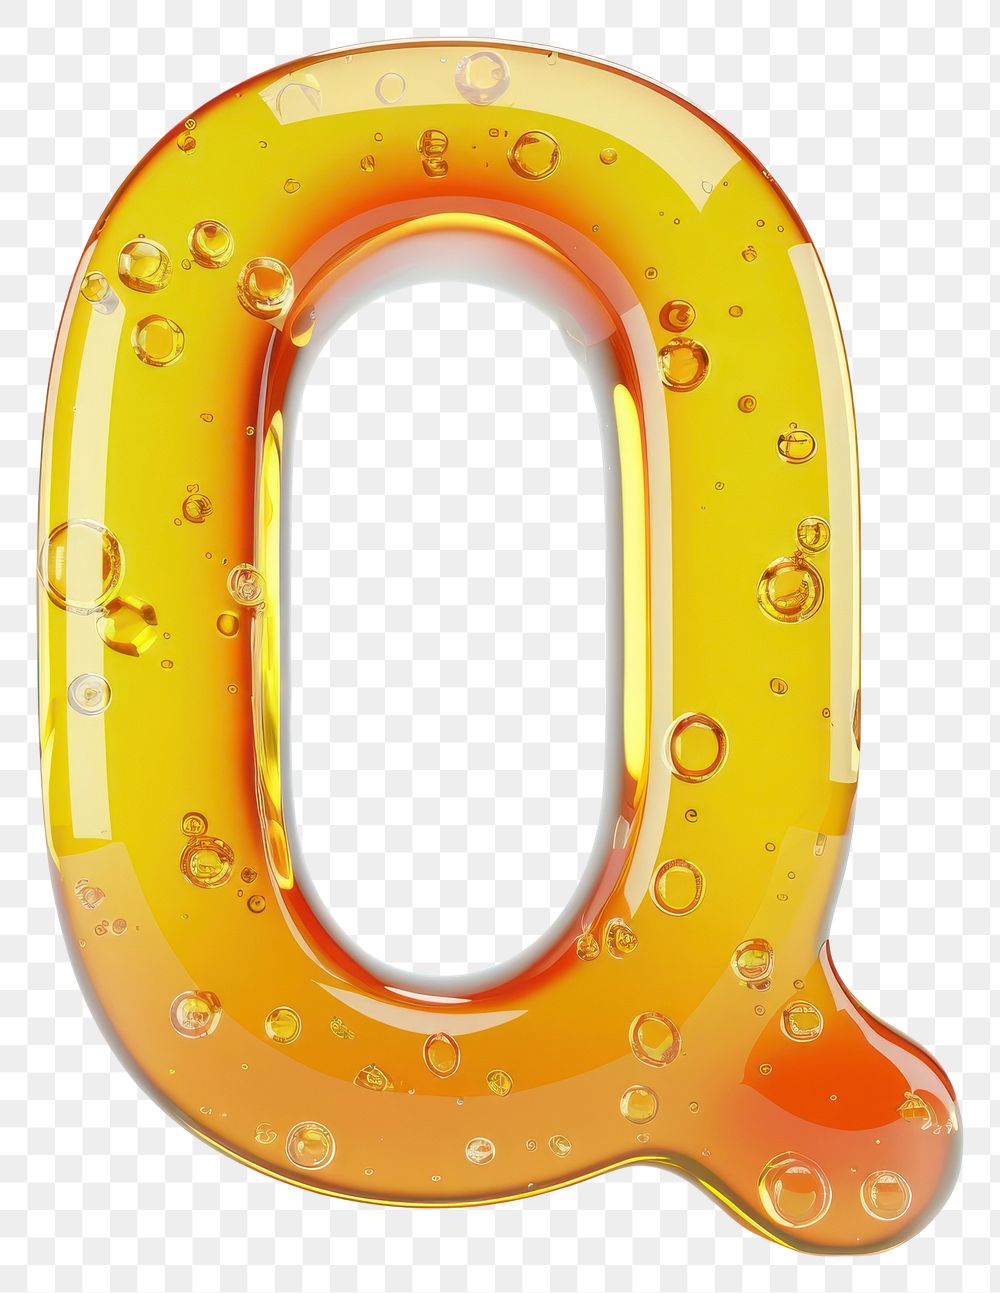 Letter Q yellow number symbol.